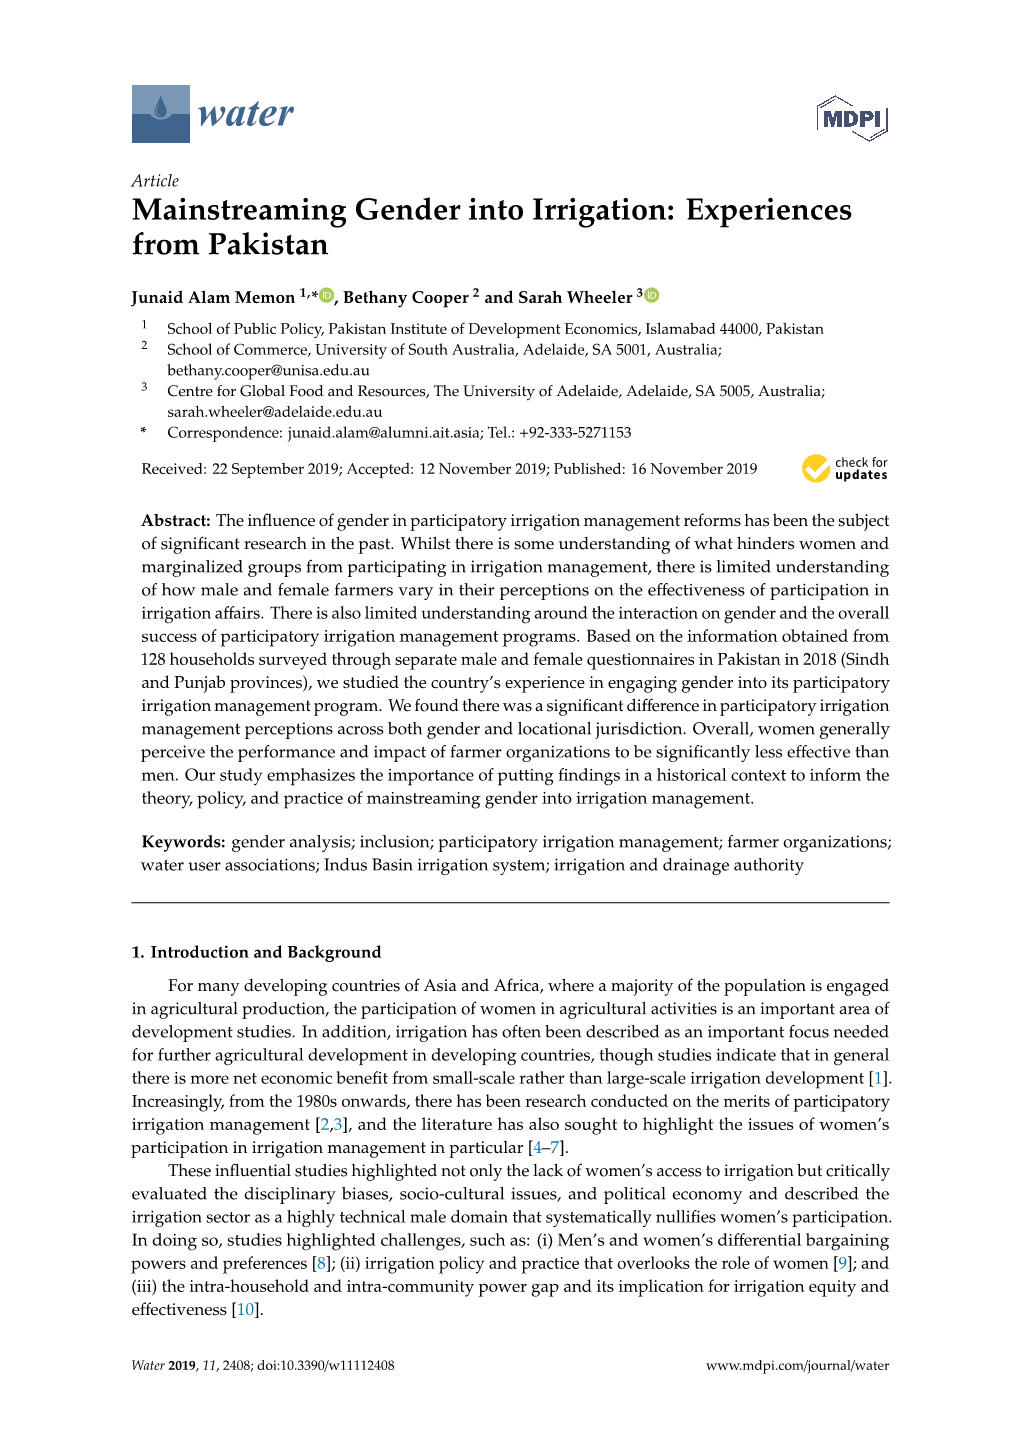 Mainstreaming Gender Into Irrigation: Experiences from Pakistan